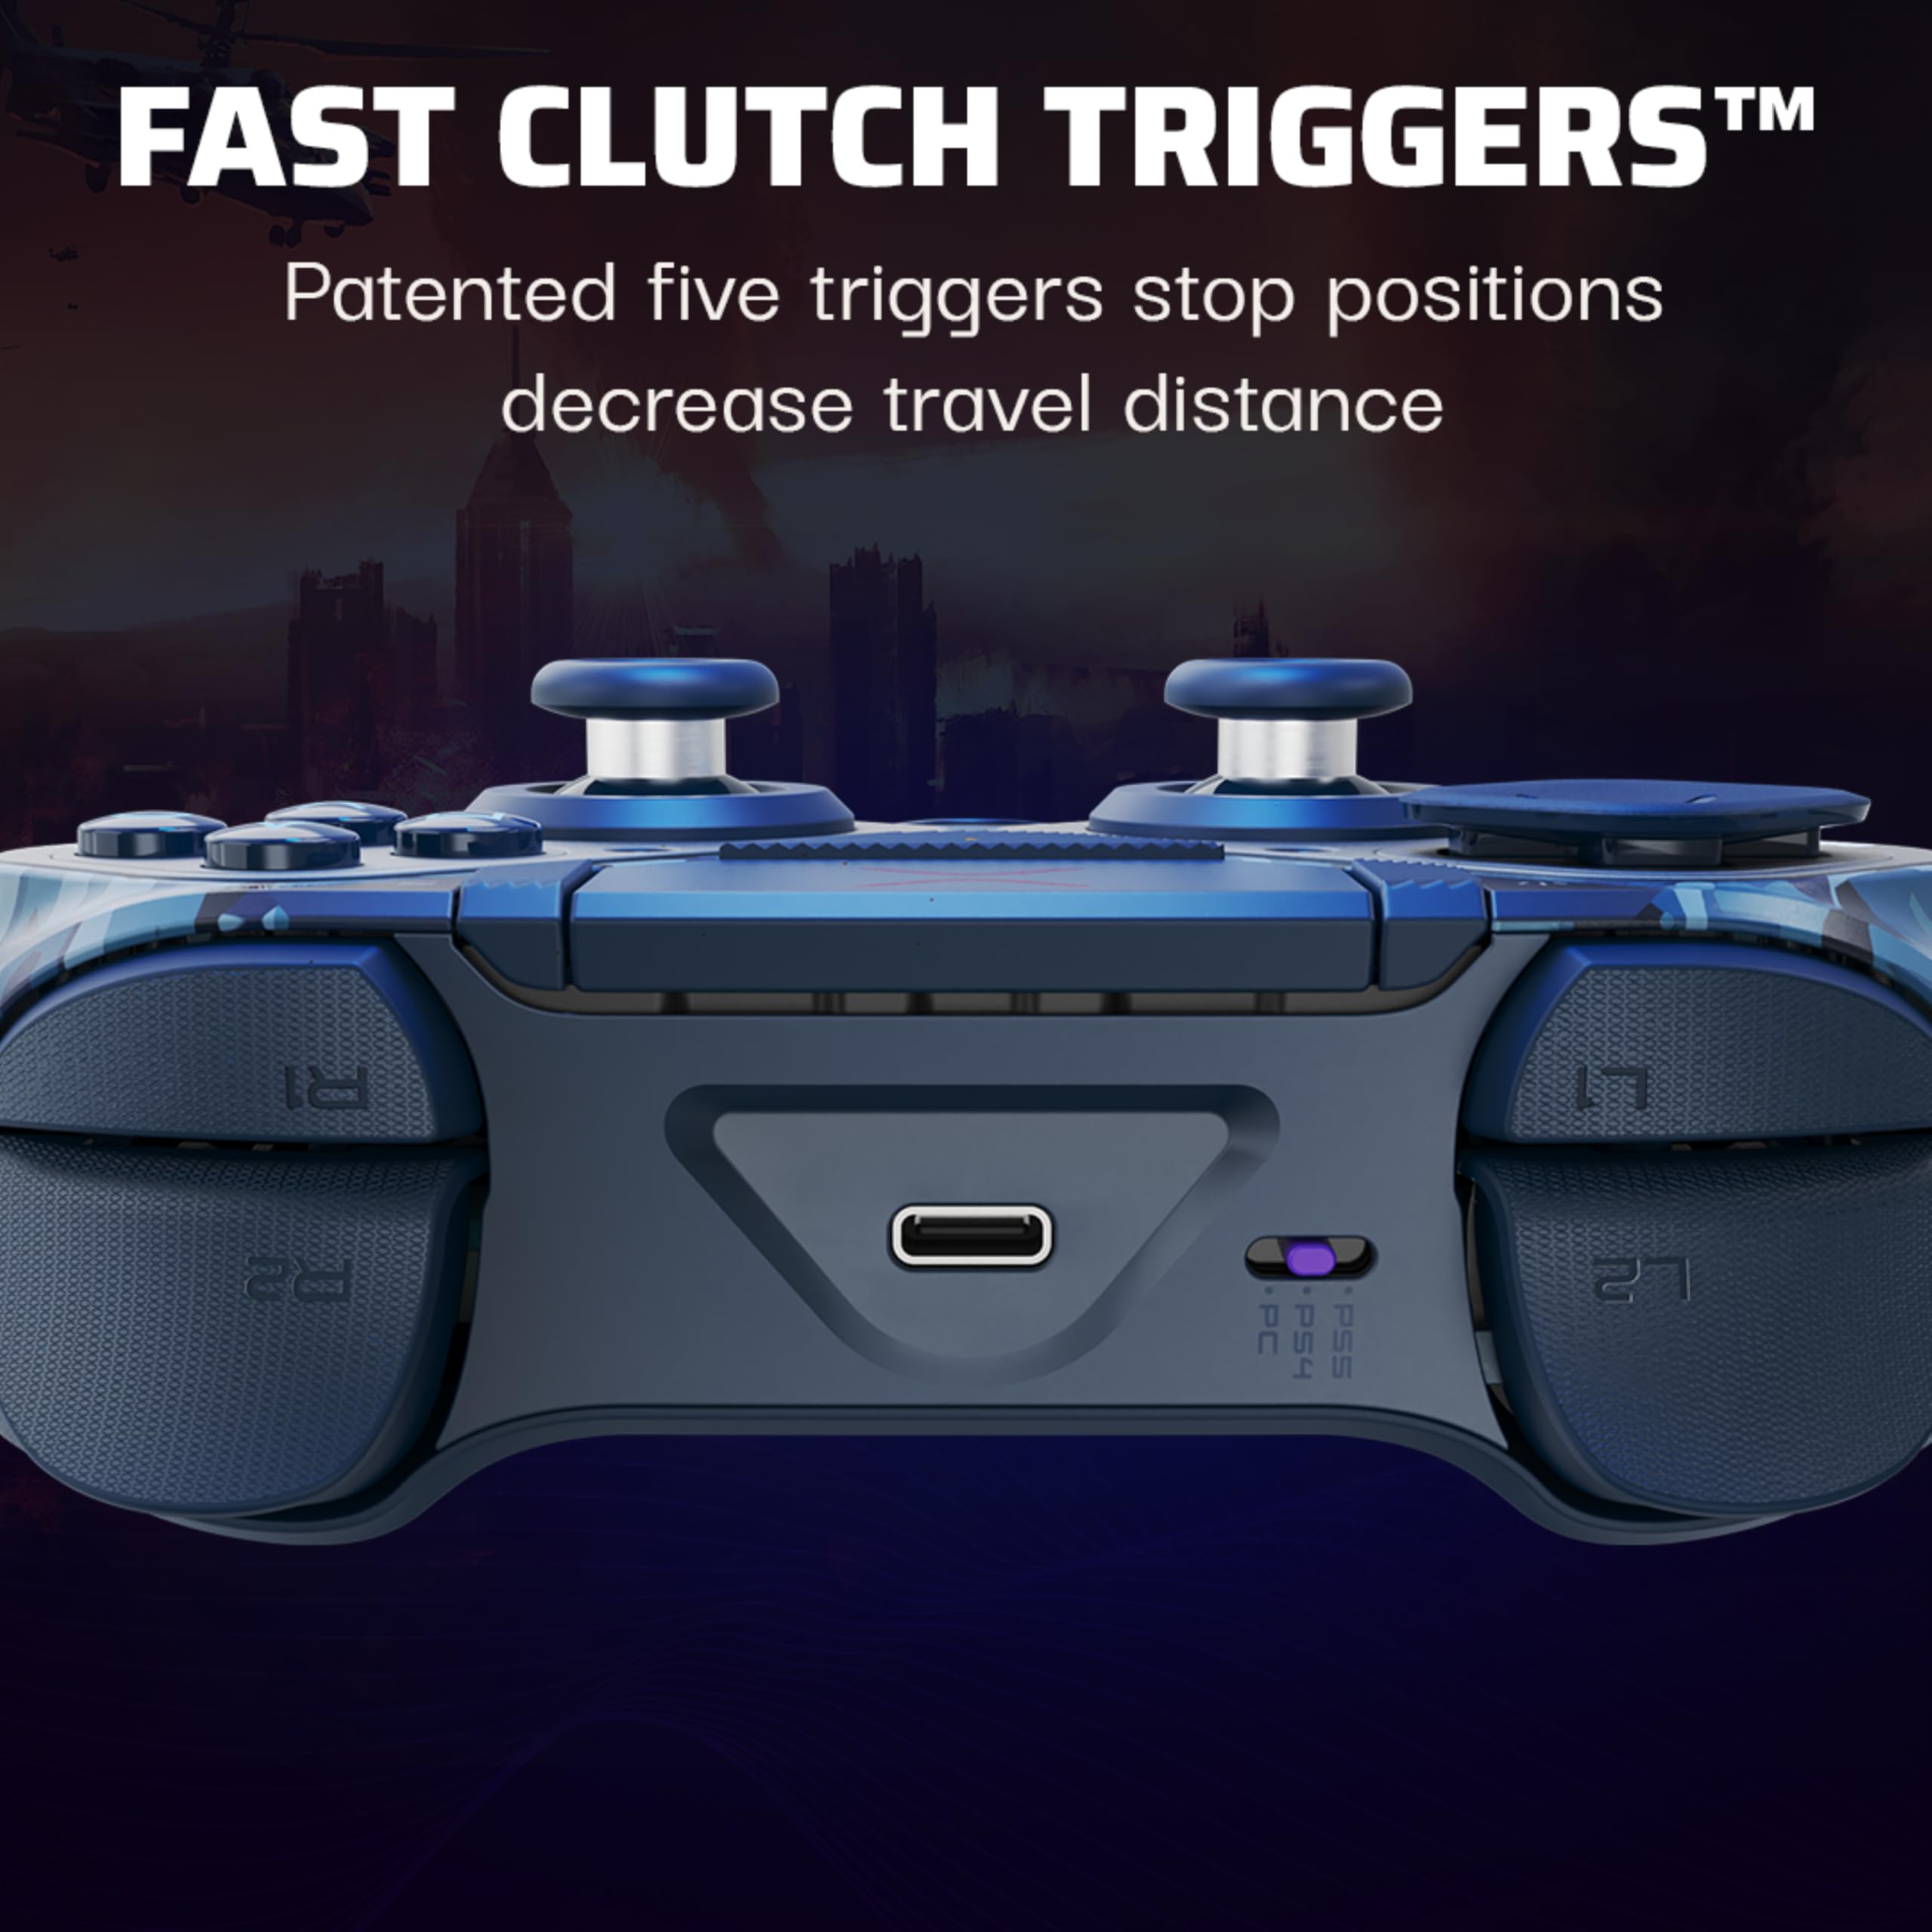 PDP Victrix Pro BFG Wireless Controller for PS4/PS5/PC, Midnight Mask Sony 3D Audio, Modular Back Buttons/Clutch Triggers/Joystick